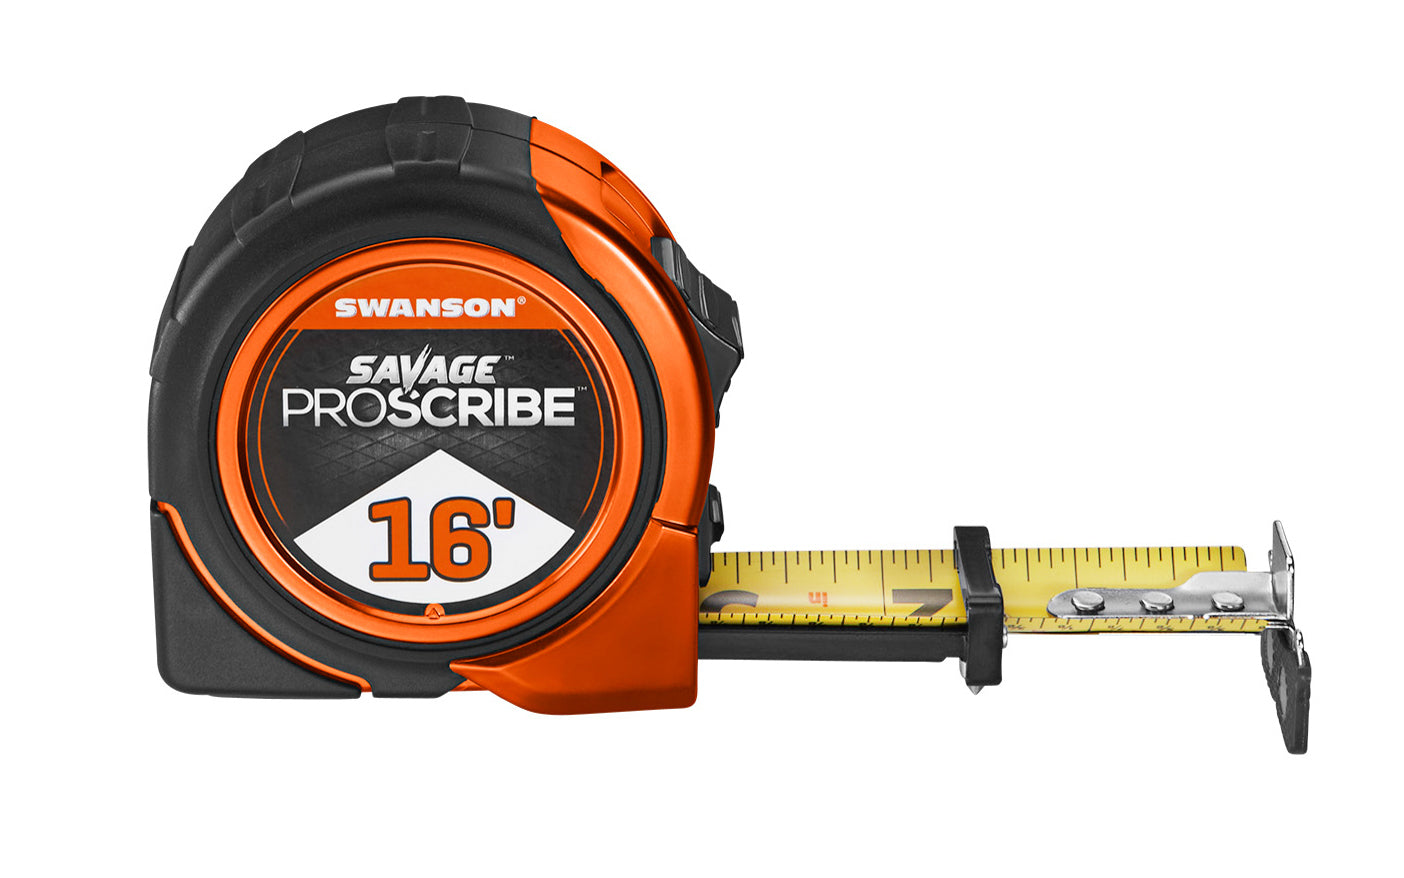 Swanson Savage Proscribe 16' Tape Measure ~ Magnetic Tip - Scribes circles into surfaces with centering pin - Model No. SVPS16M1